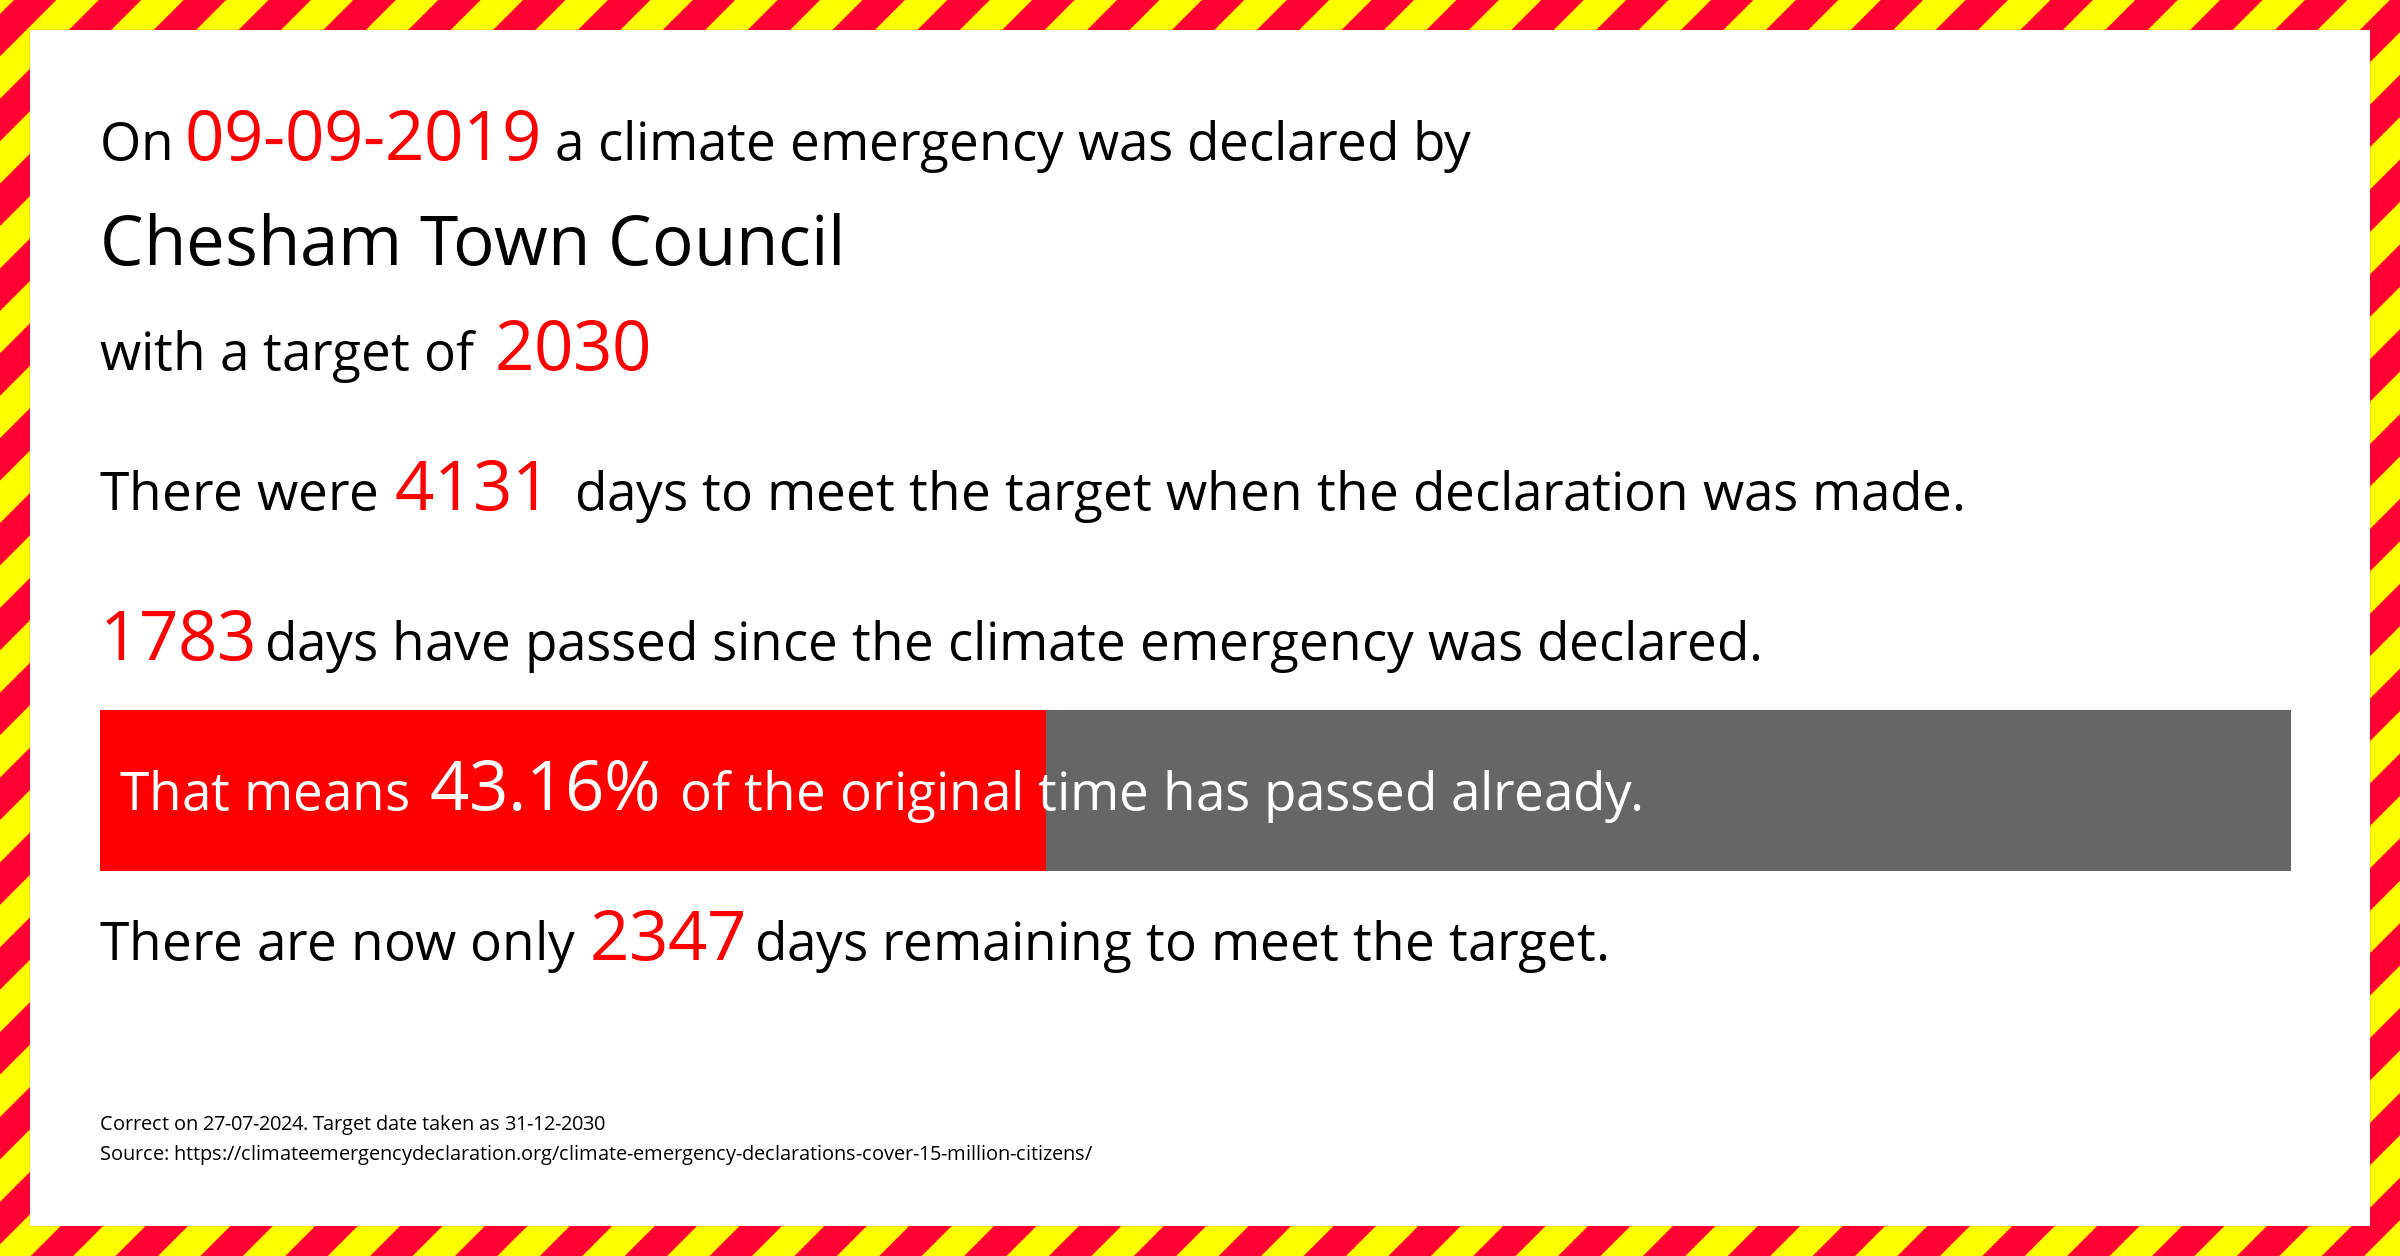 Chesham Town Council  declared a Climate emergency on Monday 9th September 2019, with a target of 2030.